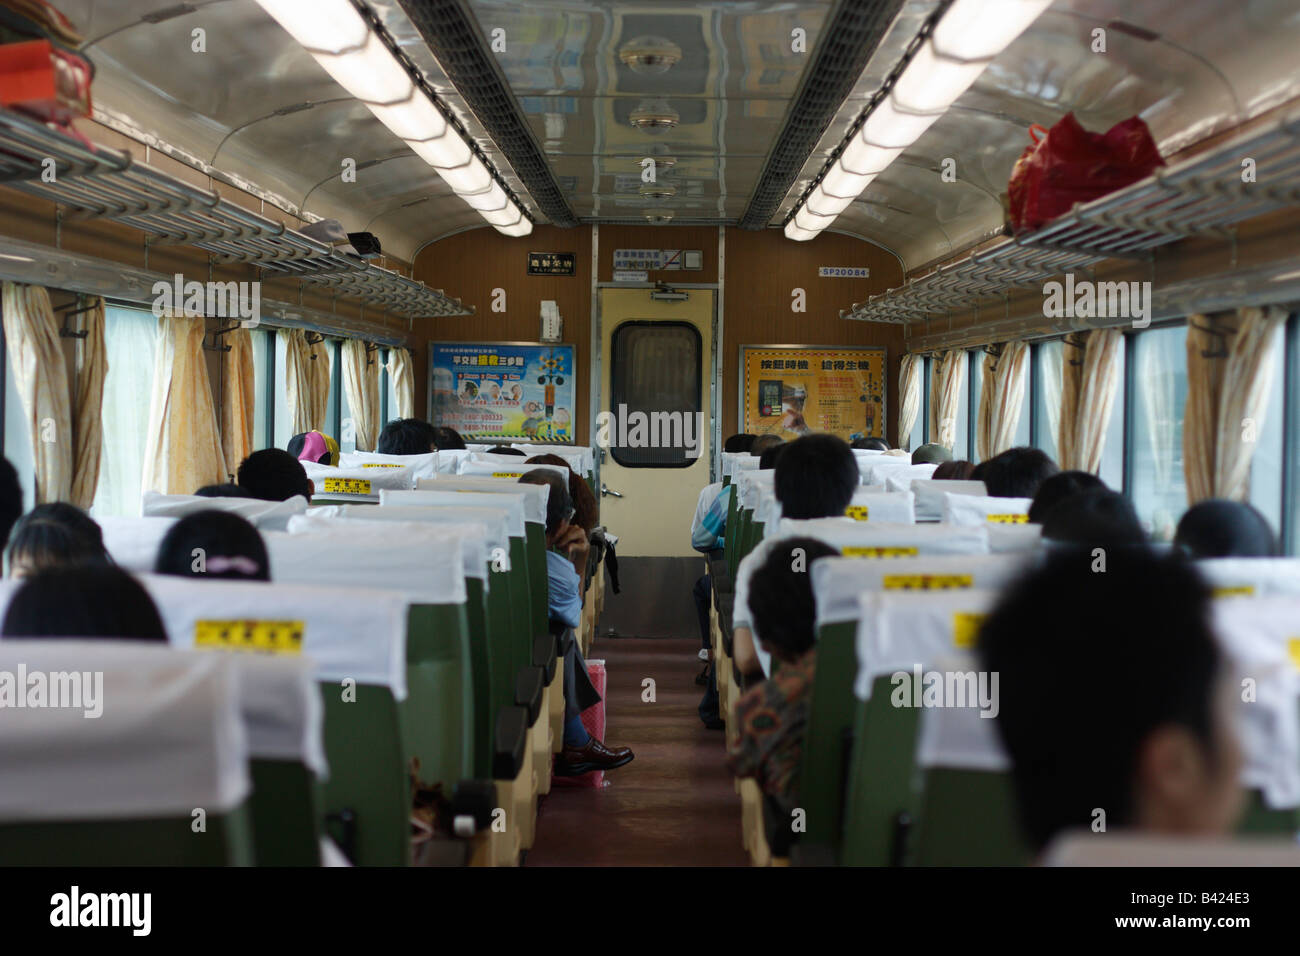 Interior of a full train carriage in Taiwan. Stock Photo